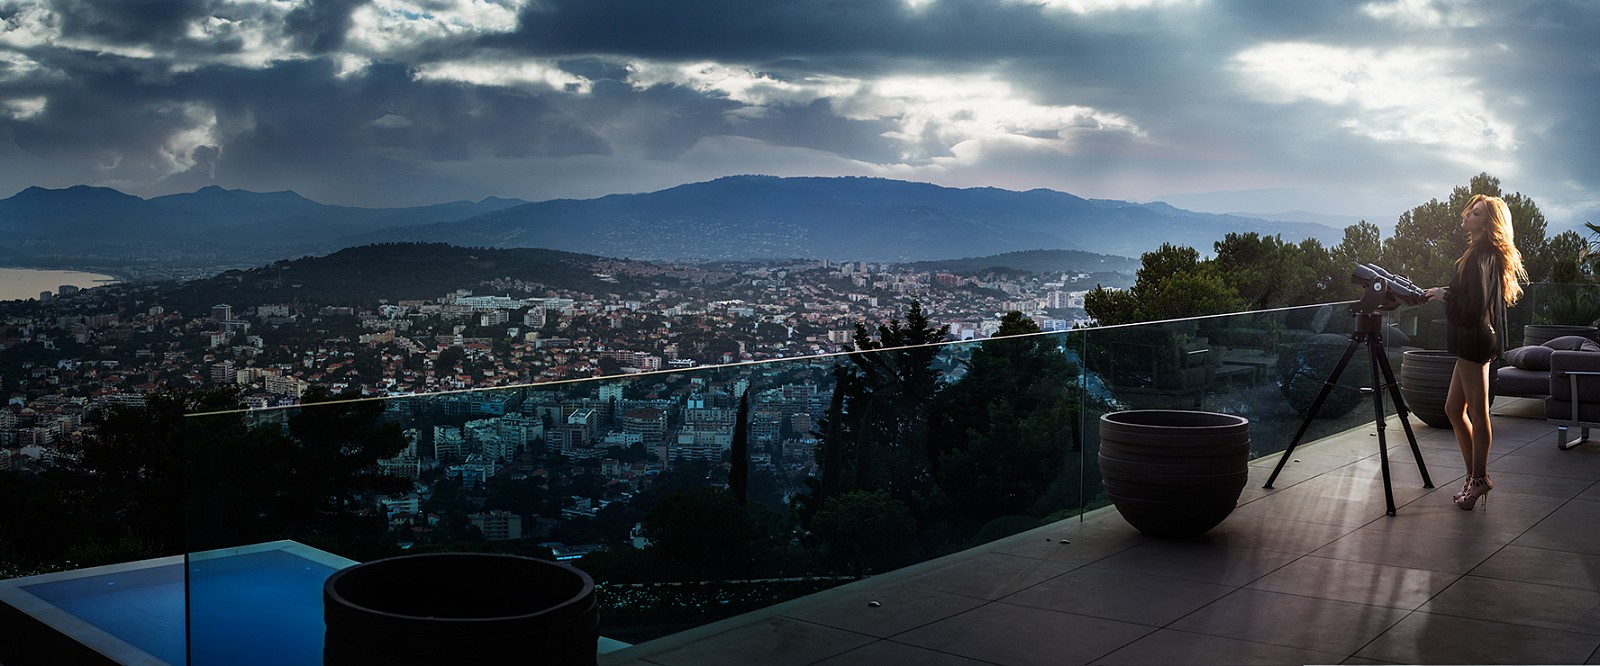 David Drebin, On the Lookout, 2013
Digital C Print, 20 x 48 inches; 30 x 72 inches; 40 x 96 inches